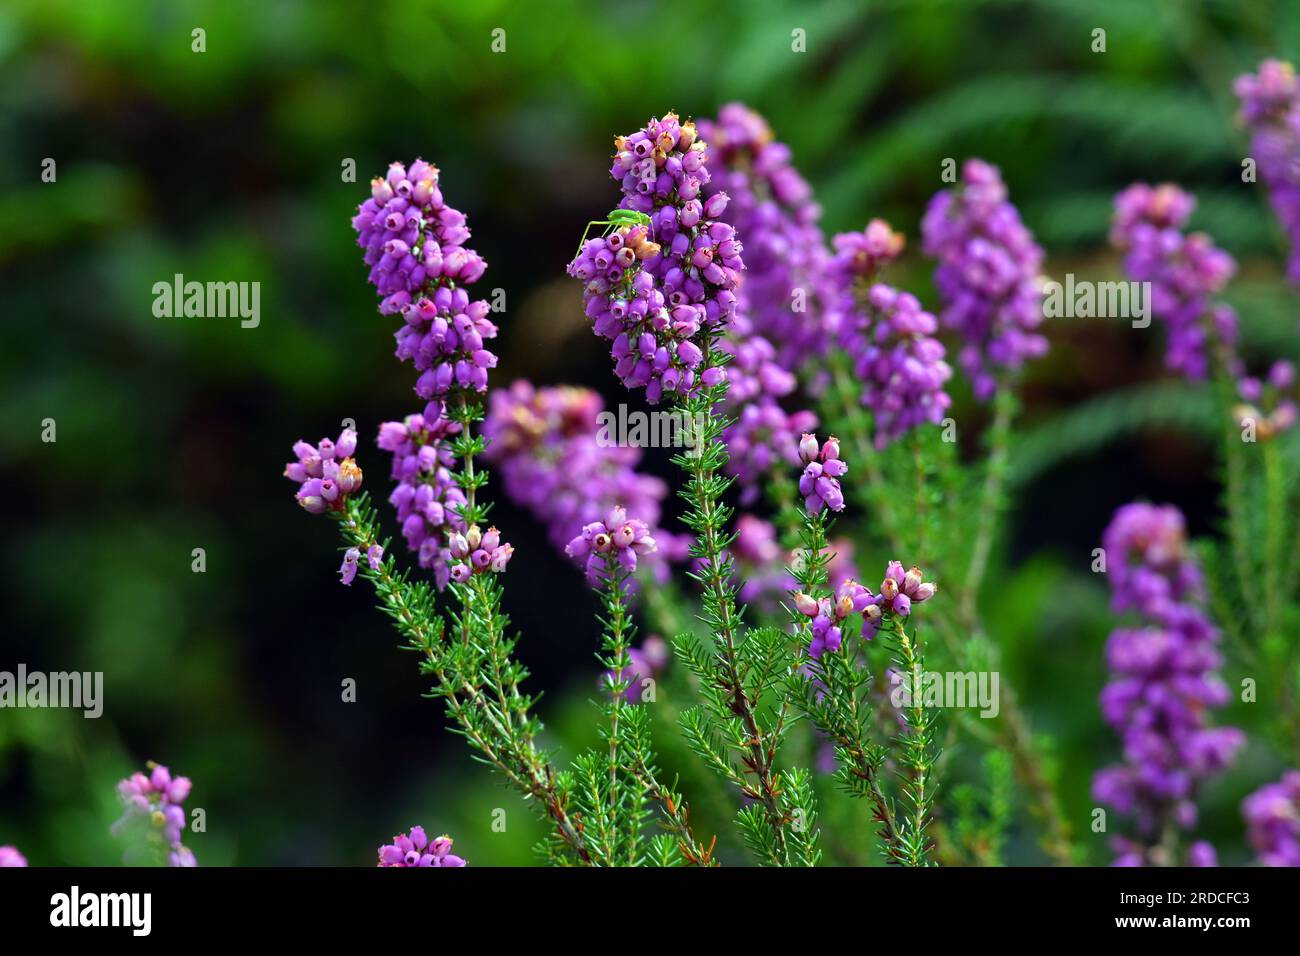 Purple flowers of bell heather (Erica cinerea) on a green background. Stock Photo